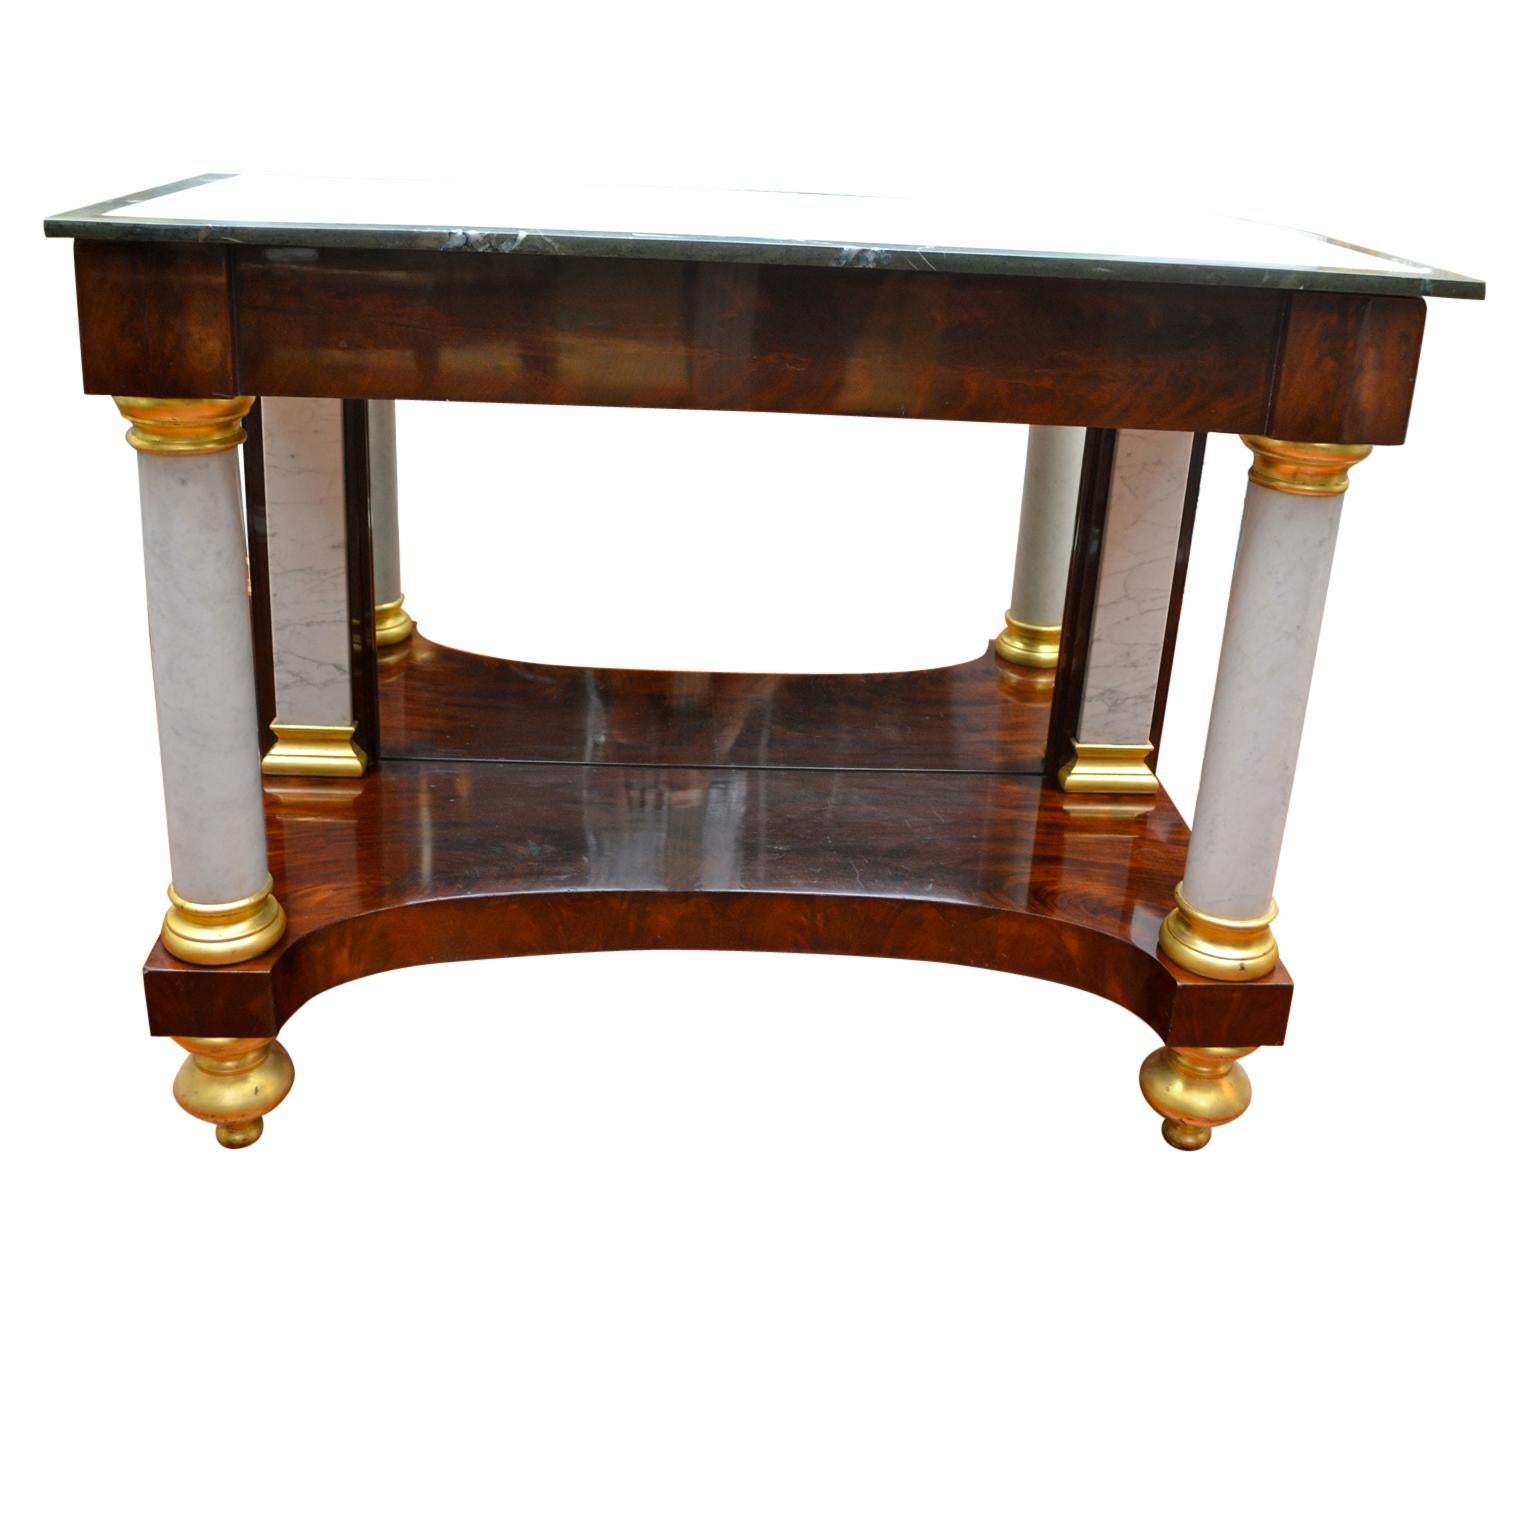 An American ‘Federal’ console with a mirrored back in well figured ‘crotch’ mahogany with white marble front columns and matching white marble pilasters to the rear, with gold leaf capitals, and feet. The white marble top with a light green band is